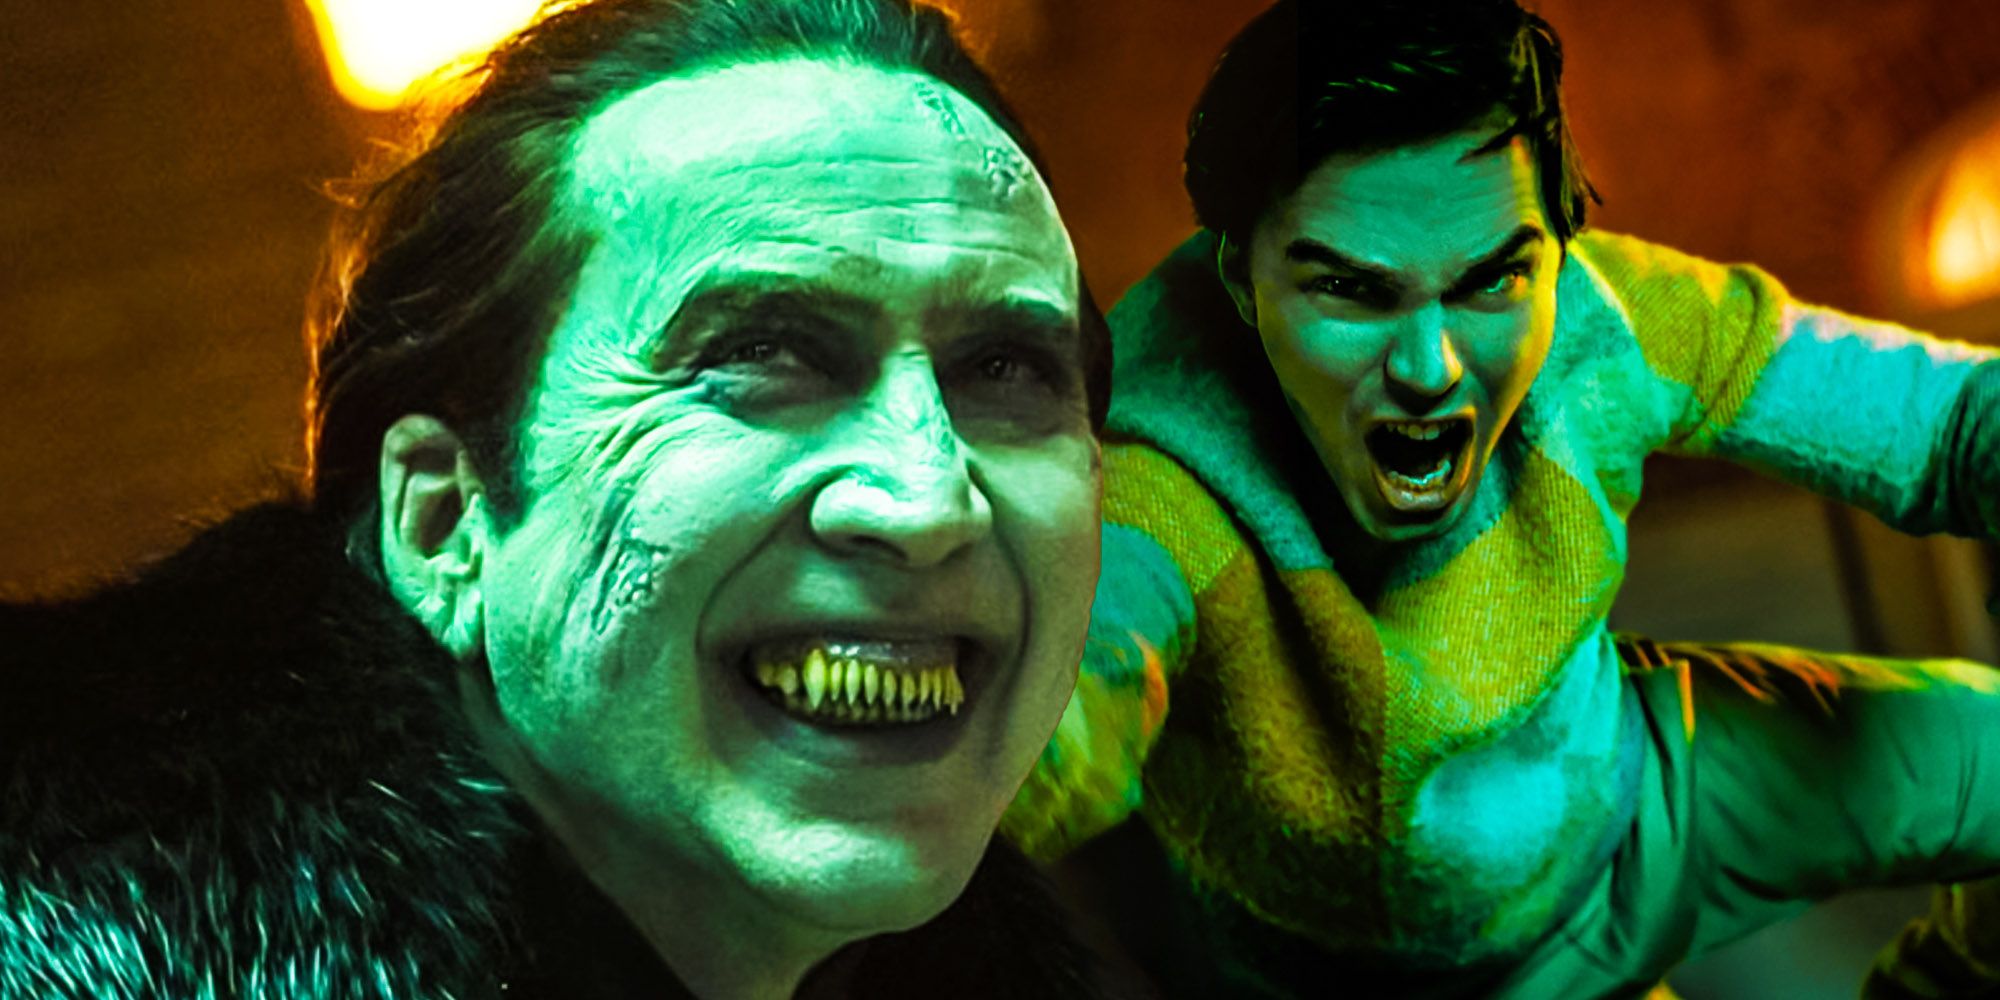 Dracula smiling while Renfield screams in blended image